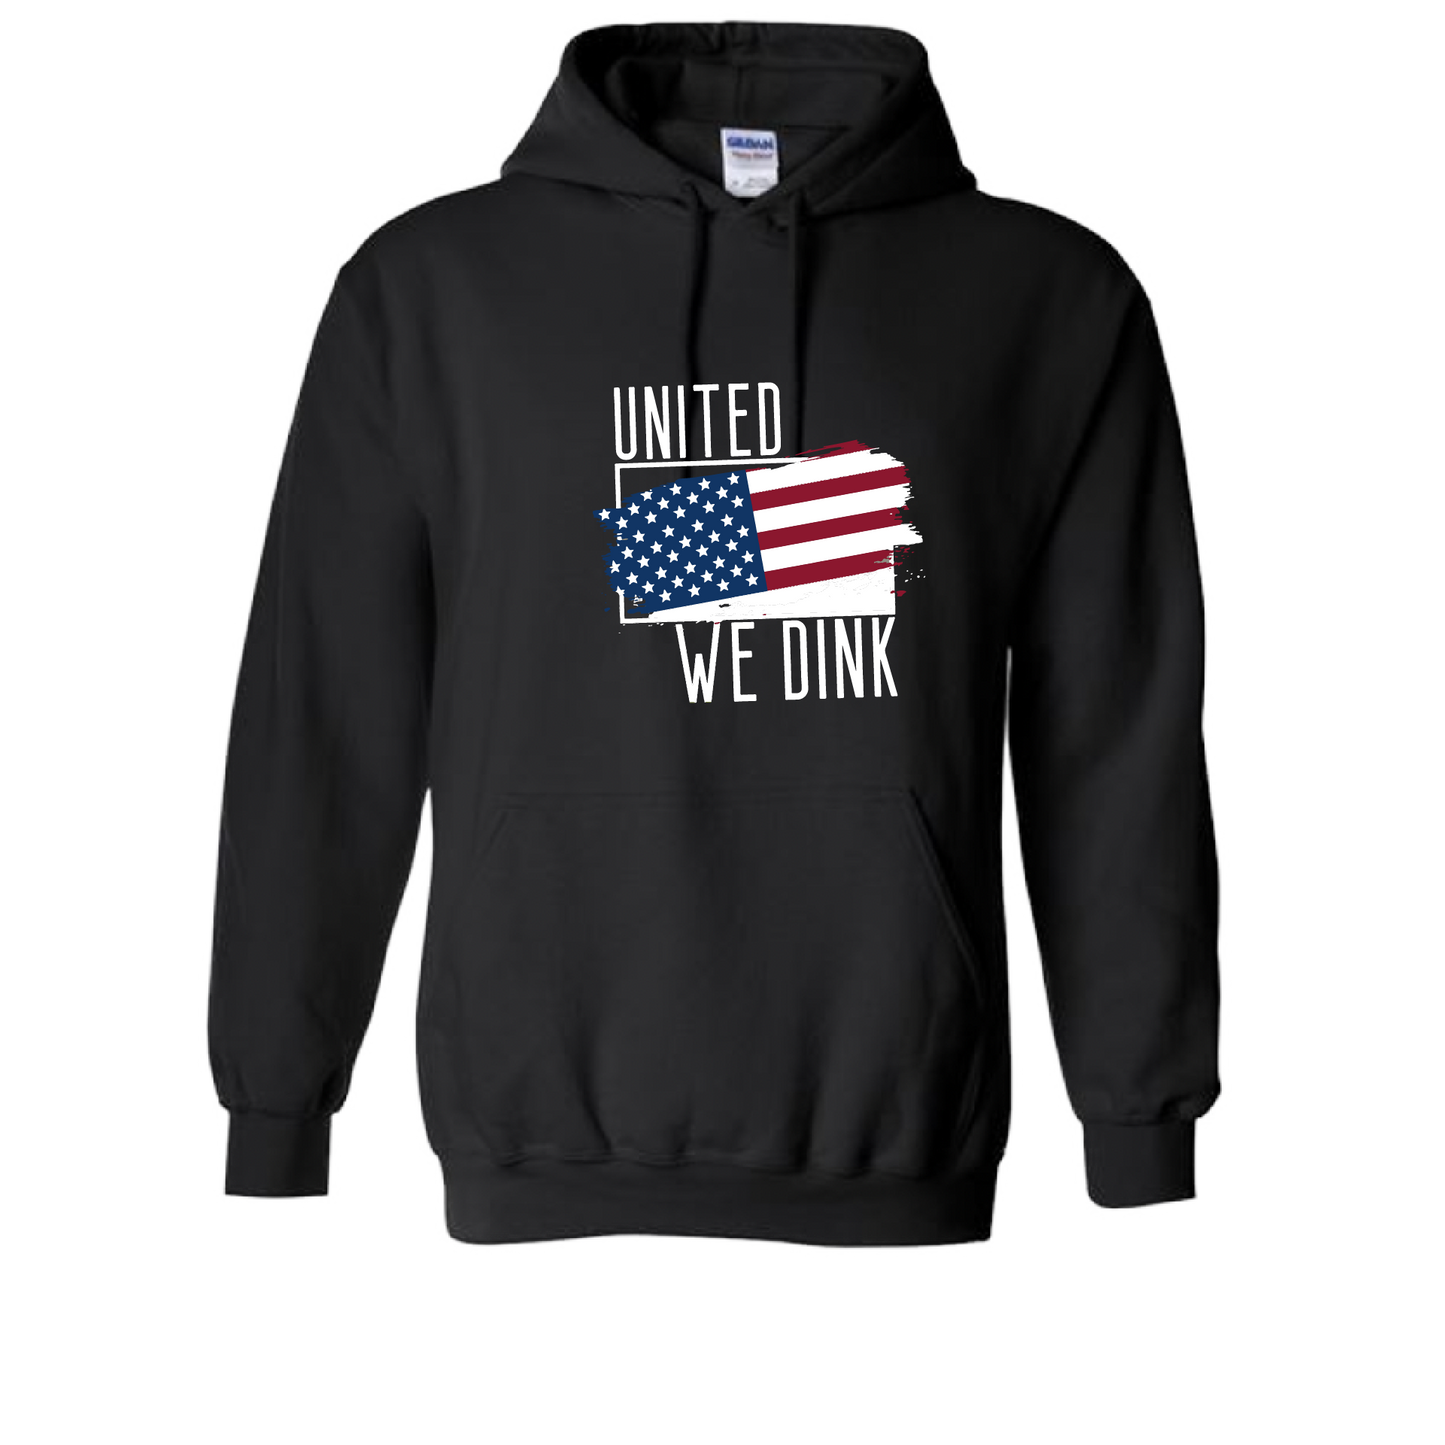 Pickleball Design: United We Dink  Unisex Hooded Sweatshirt: Moisture-wicking, double-lined hood, front pouch pocket.  This unisex hooded sweatshirt is ultra comfortable and soft. Stay warm on the Pickleball courts while being that hit with this one of kind design.